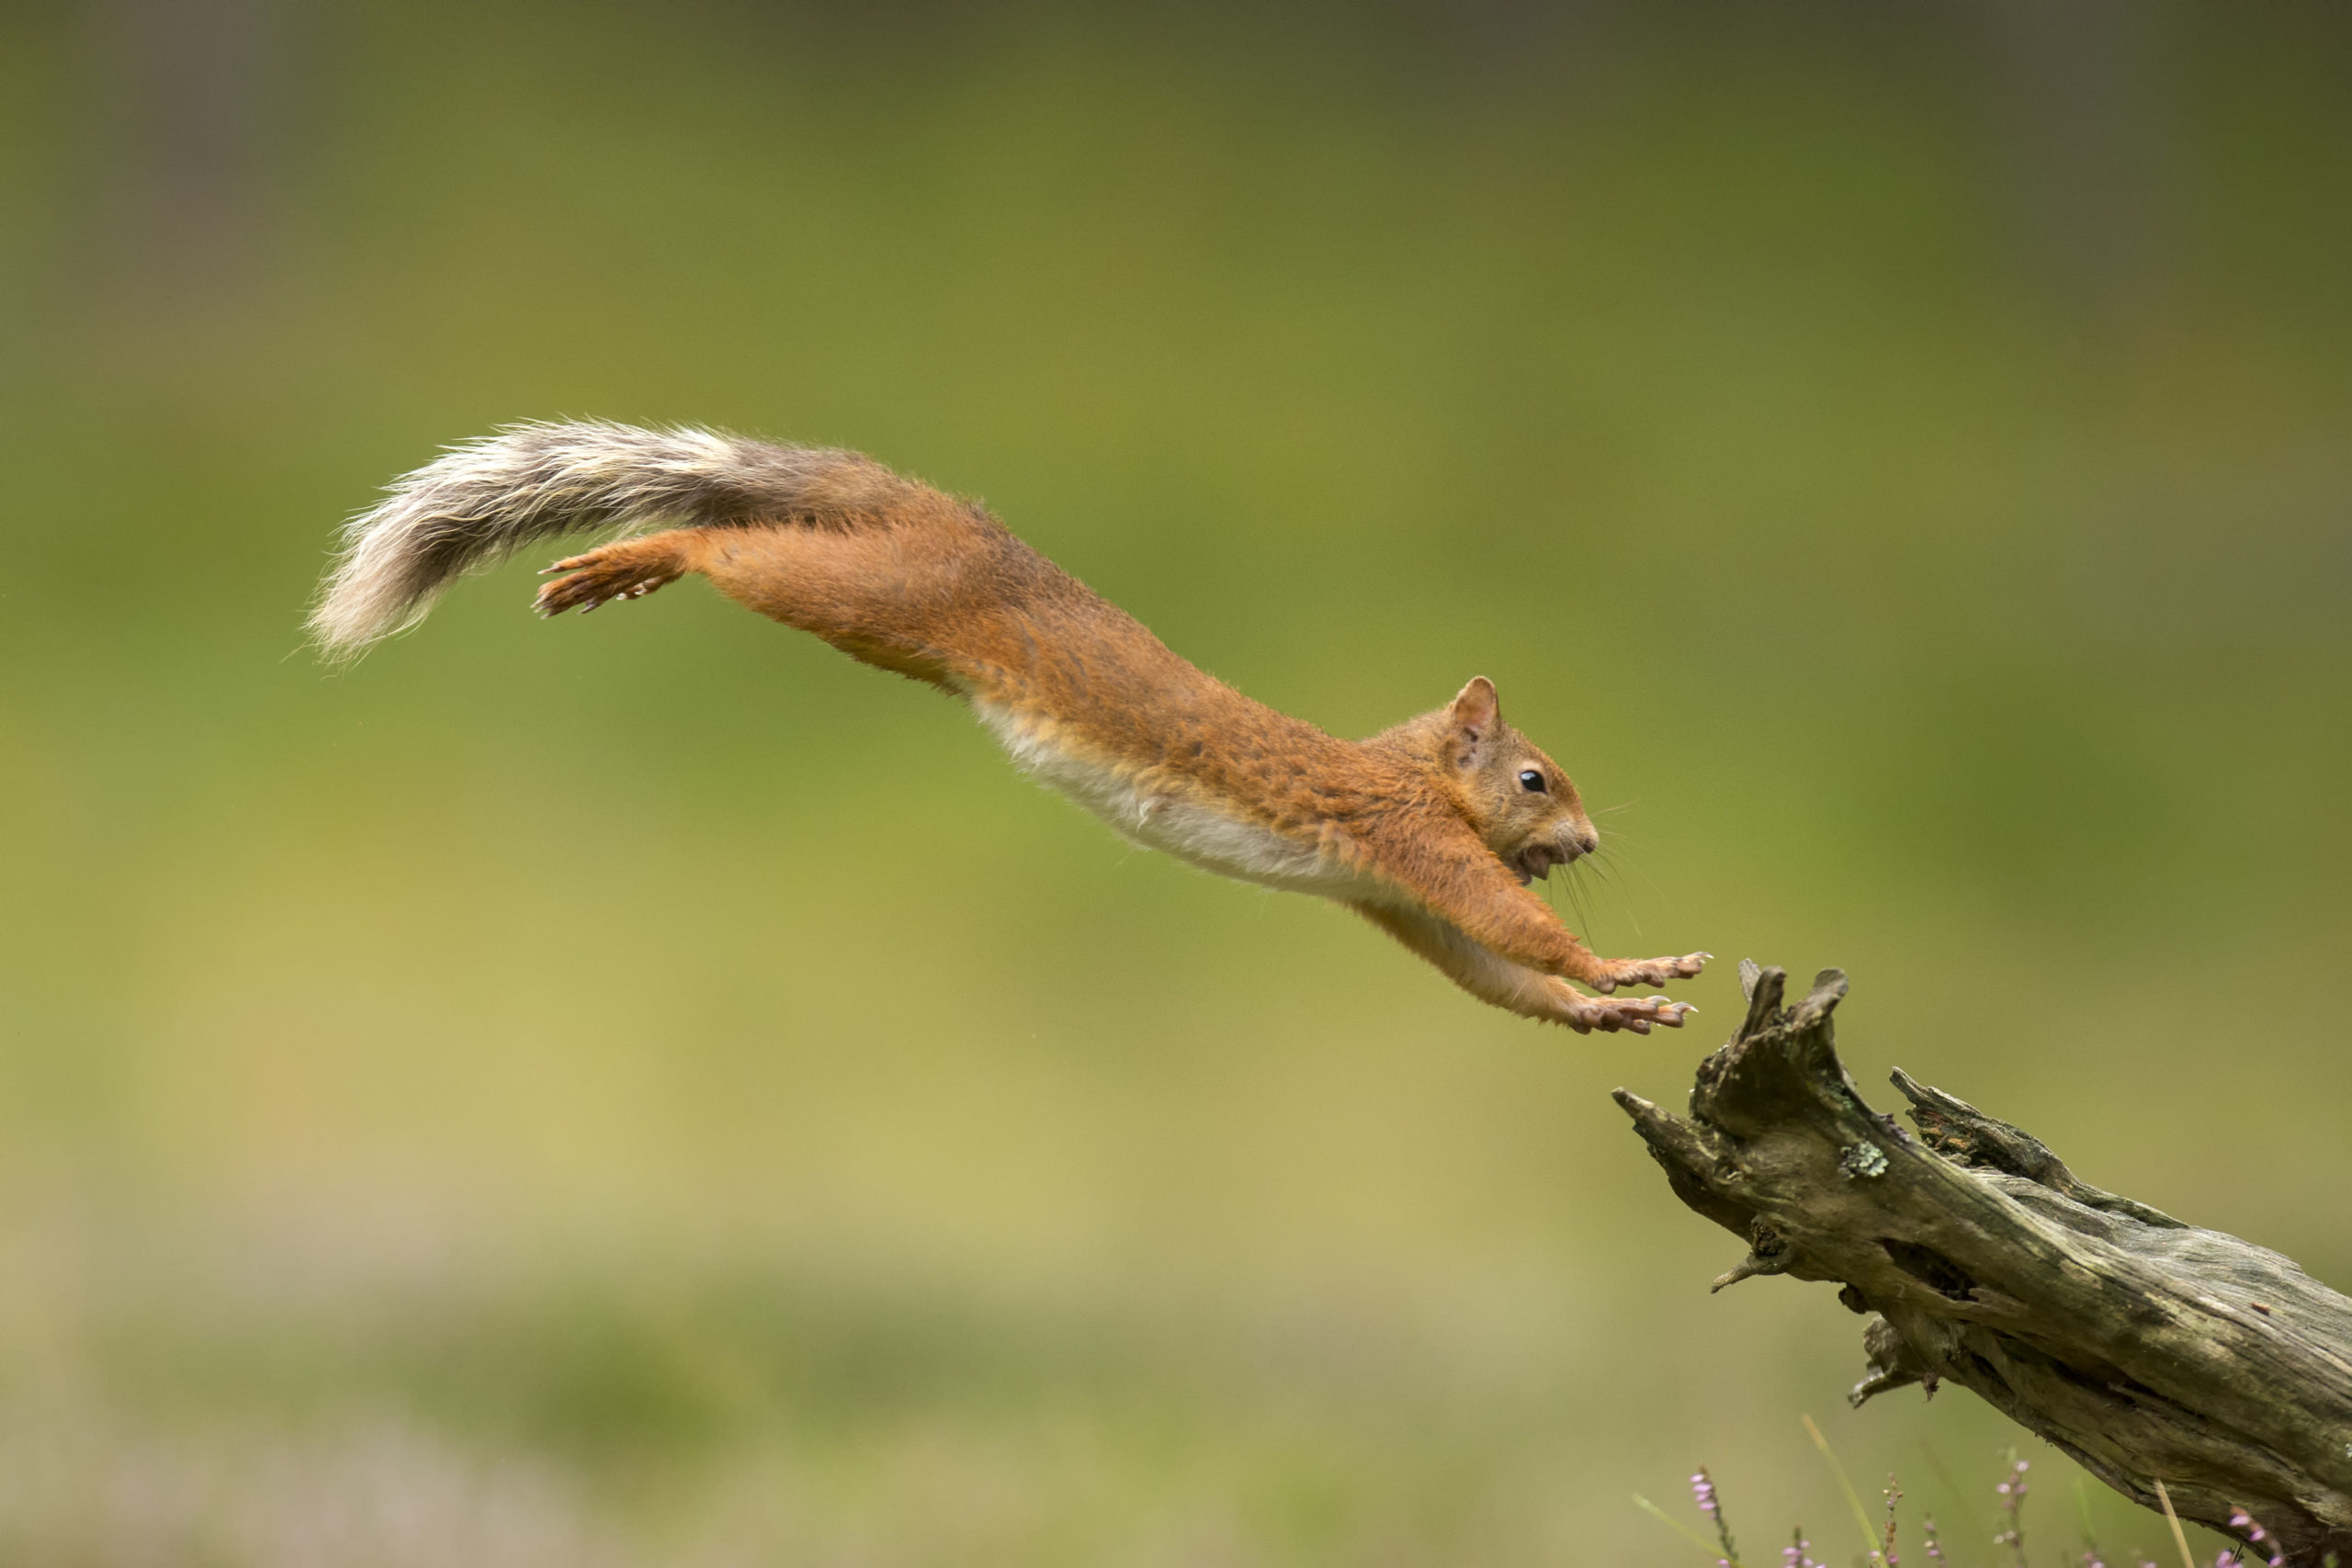 Wildlife: A red squirrel leaping onto a log at the estate.